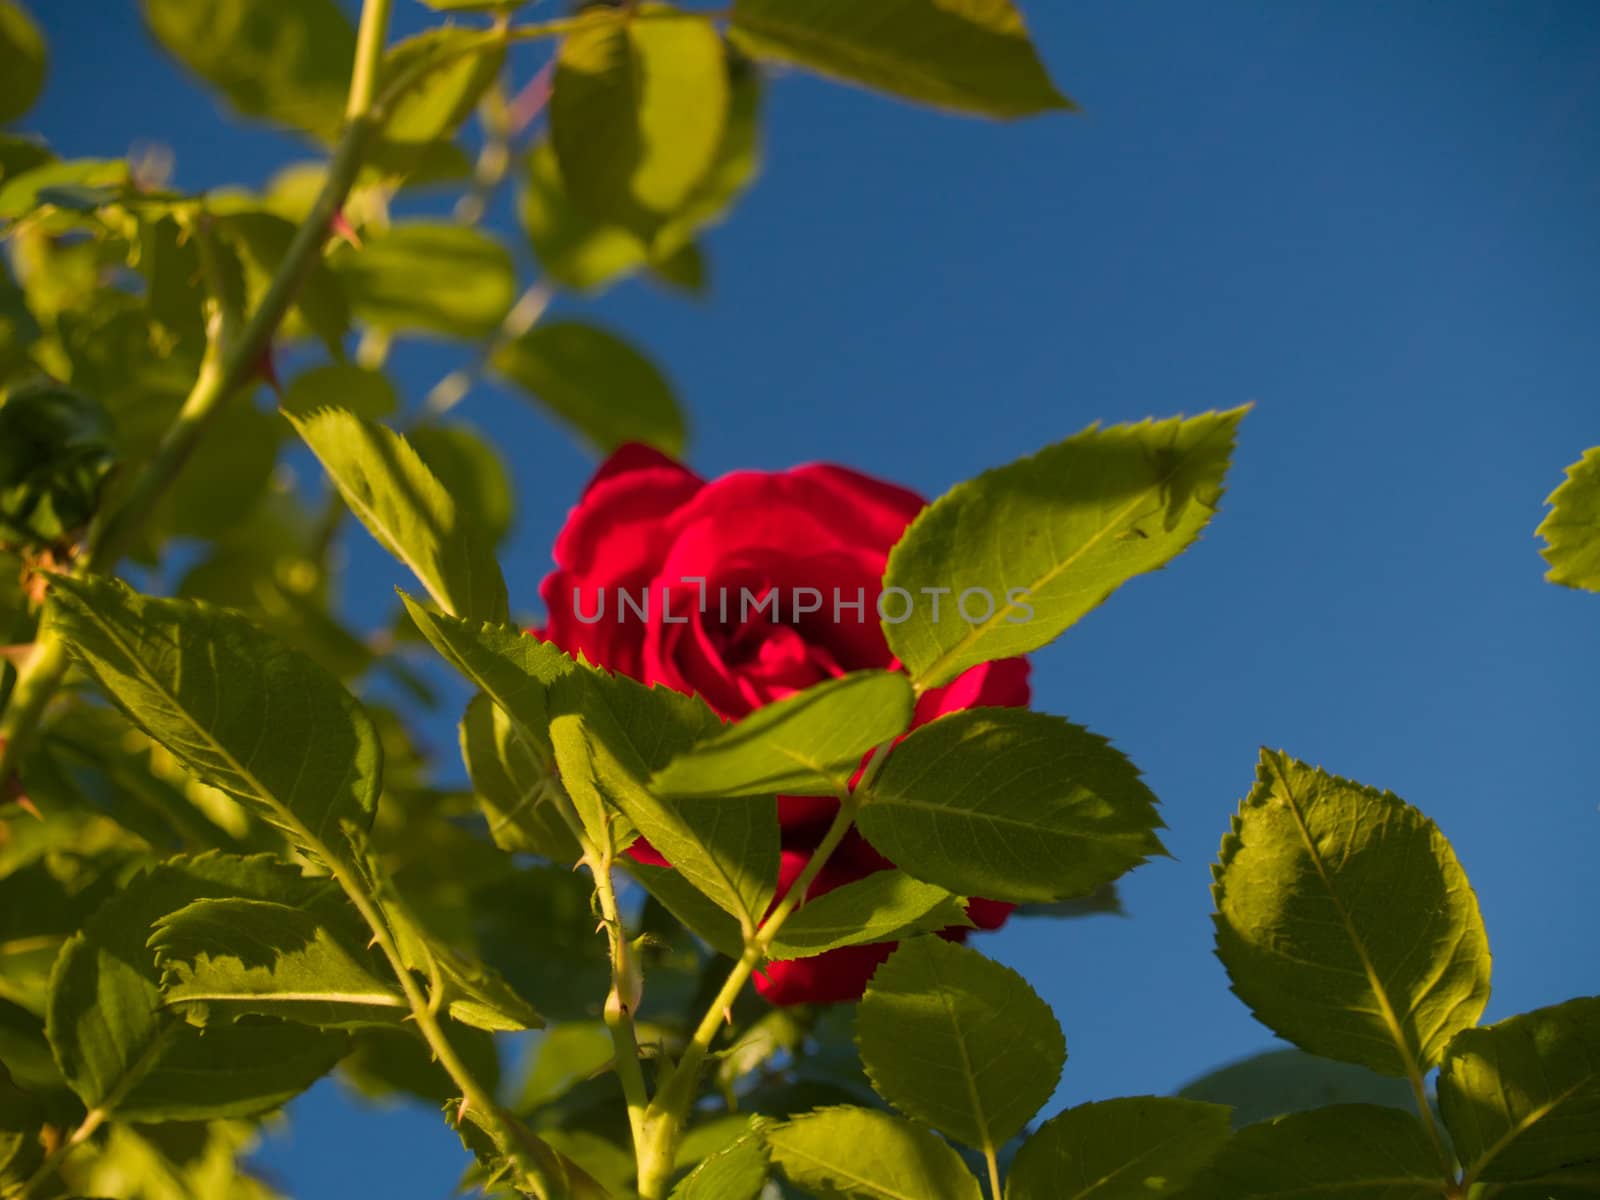 Natural frame made of red garden rose flower and leaves. Focus on nearest leaves. Flower blurred.